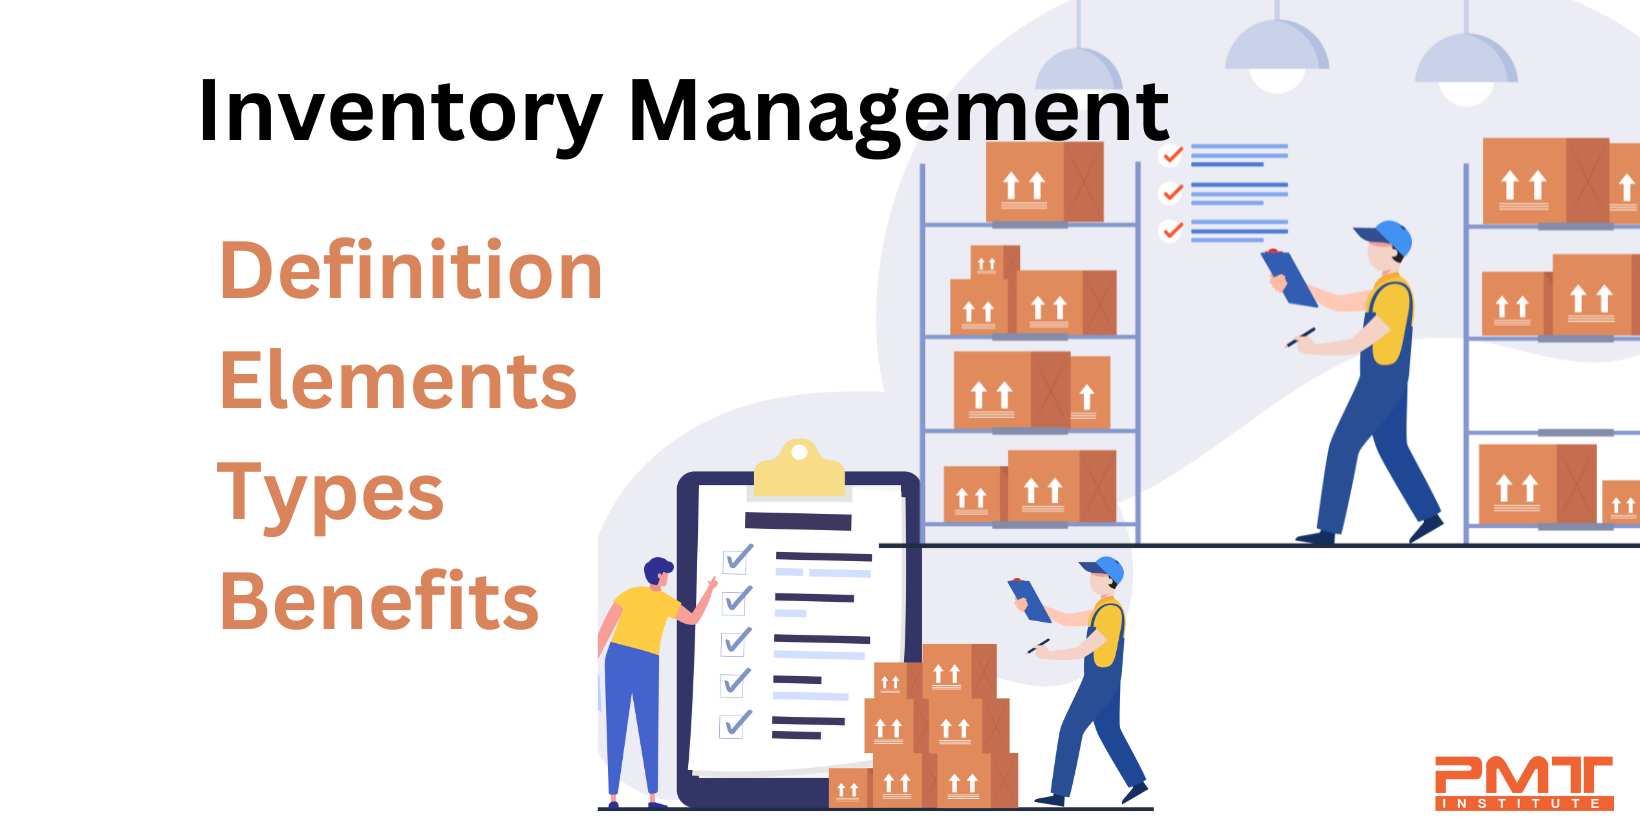 Inventory Management: Definition, Elements, Types, and Benefits